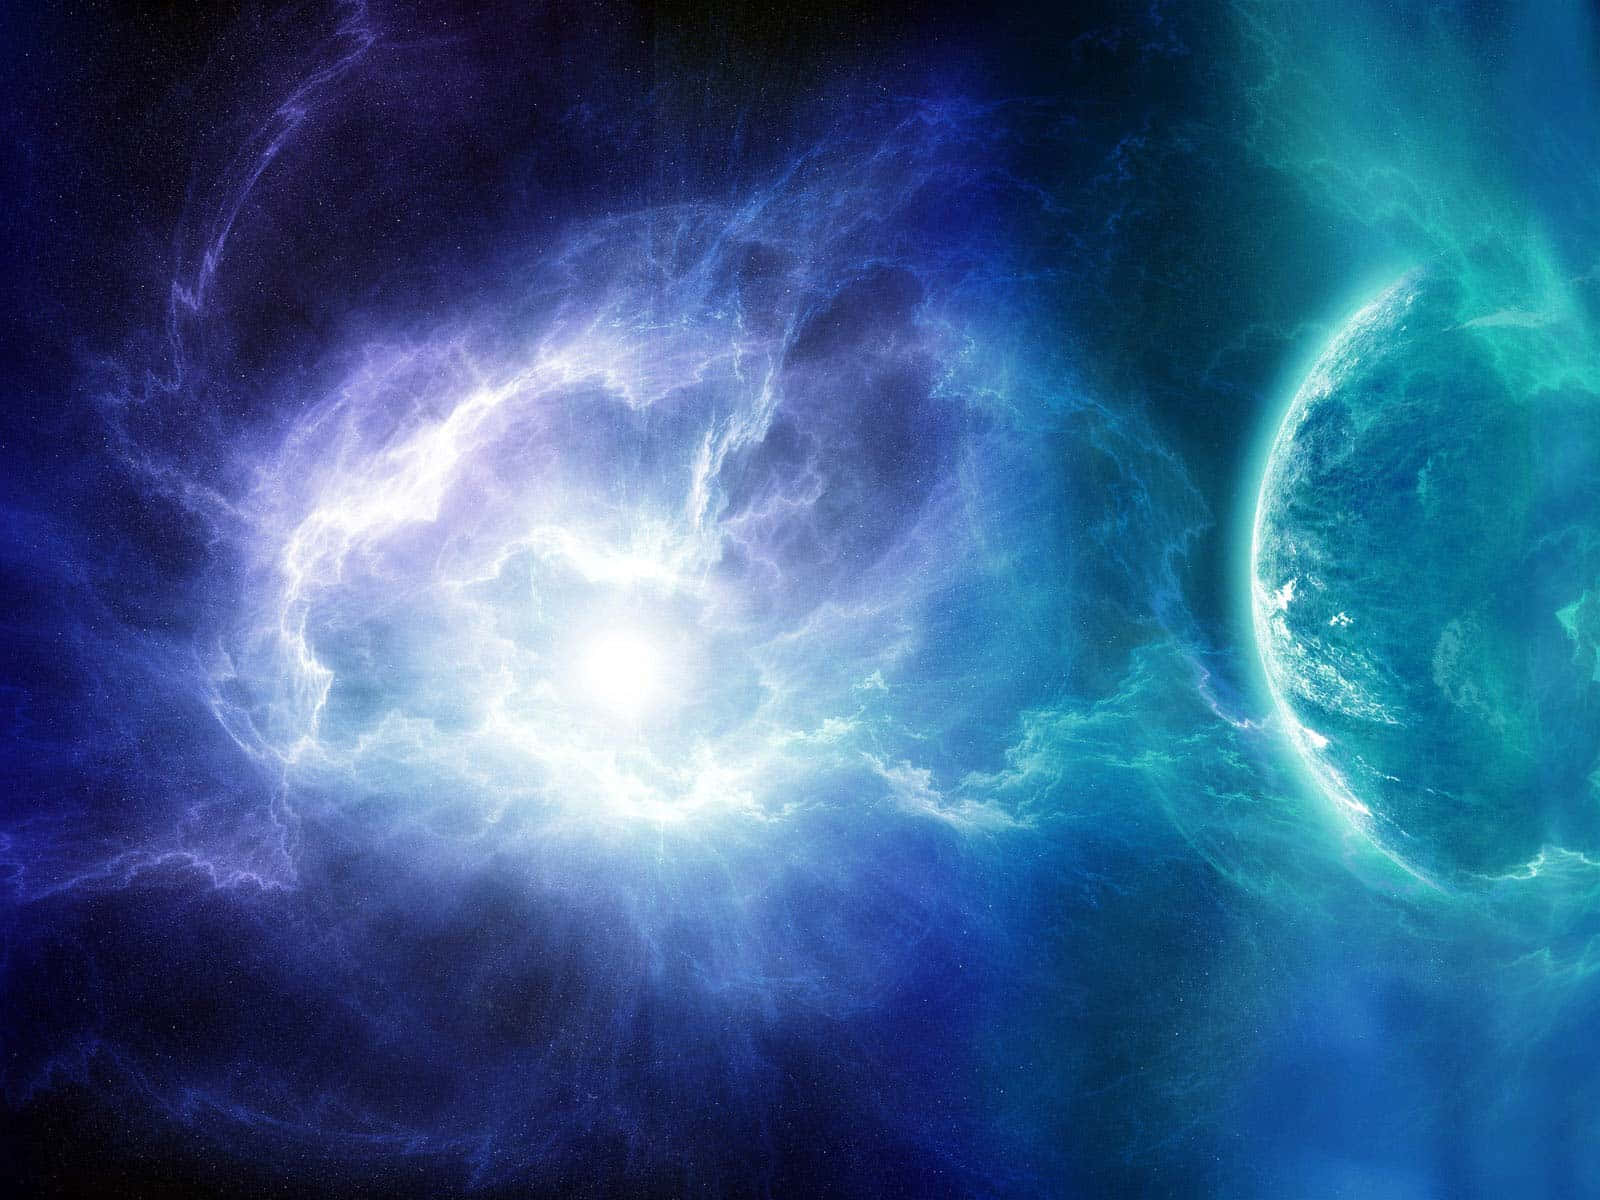 A vibrant display of cosmic rays in outer space Wallpaper